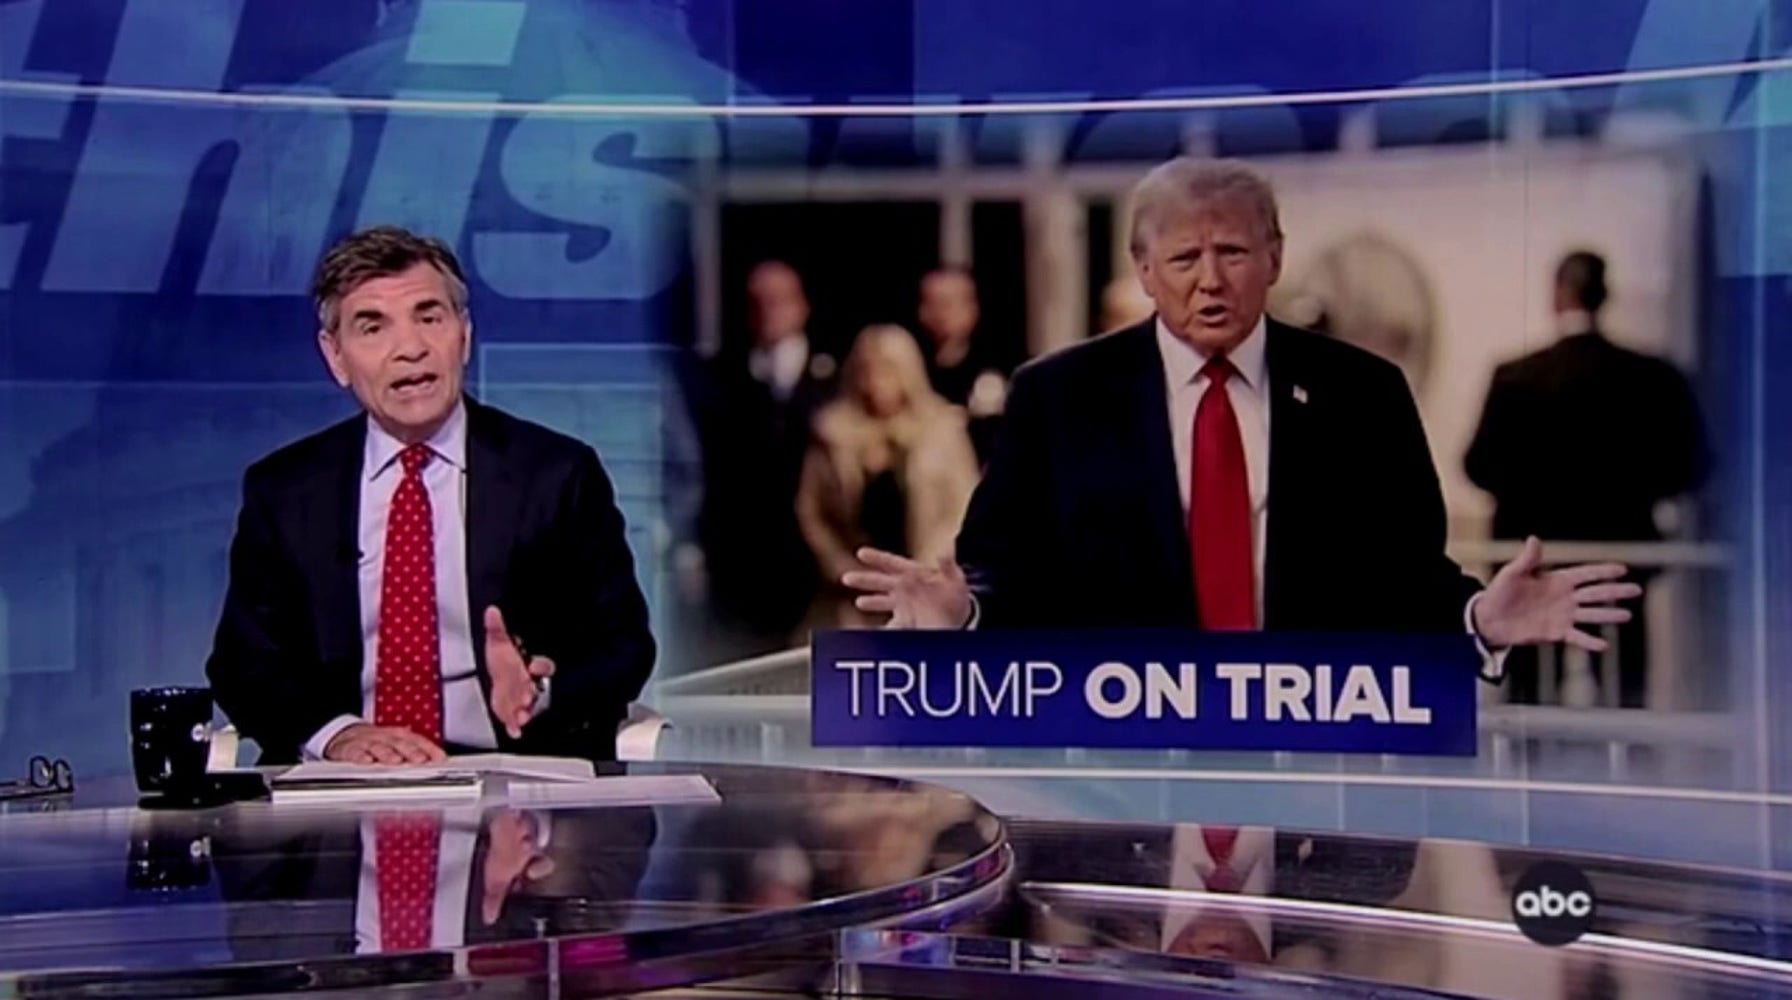 ABC's Stephanopoulos Warns of Democracy's Test, Concerns over Media's Role